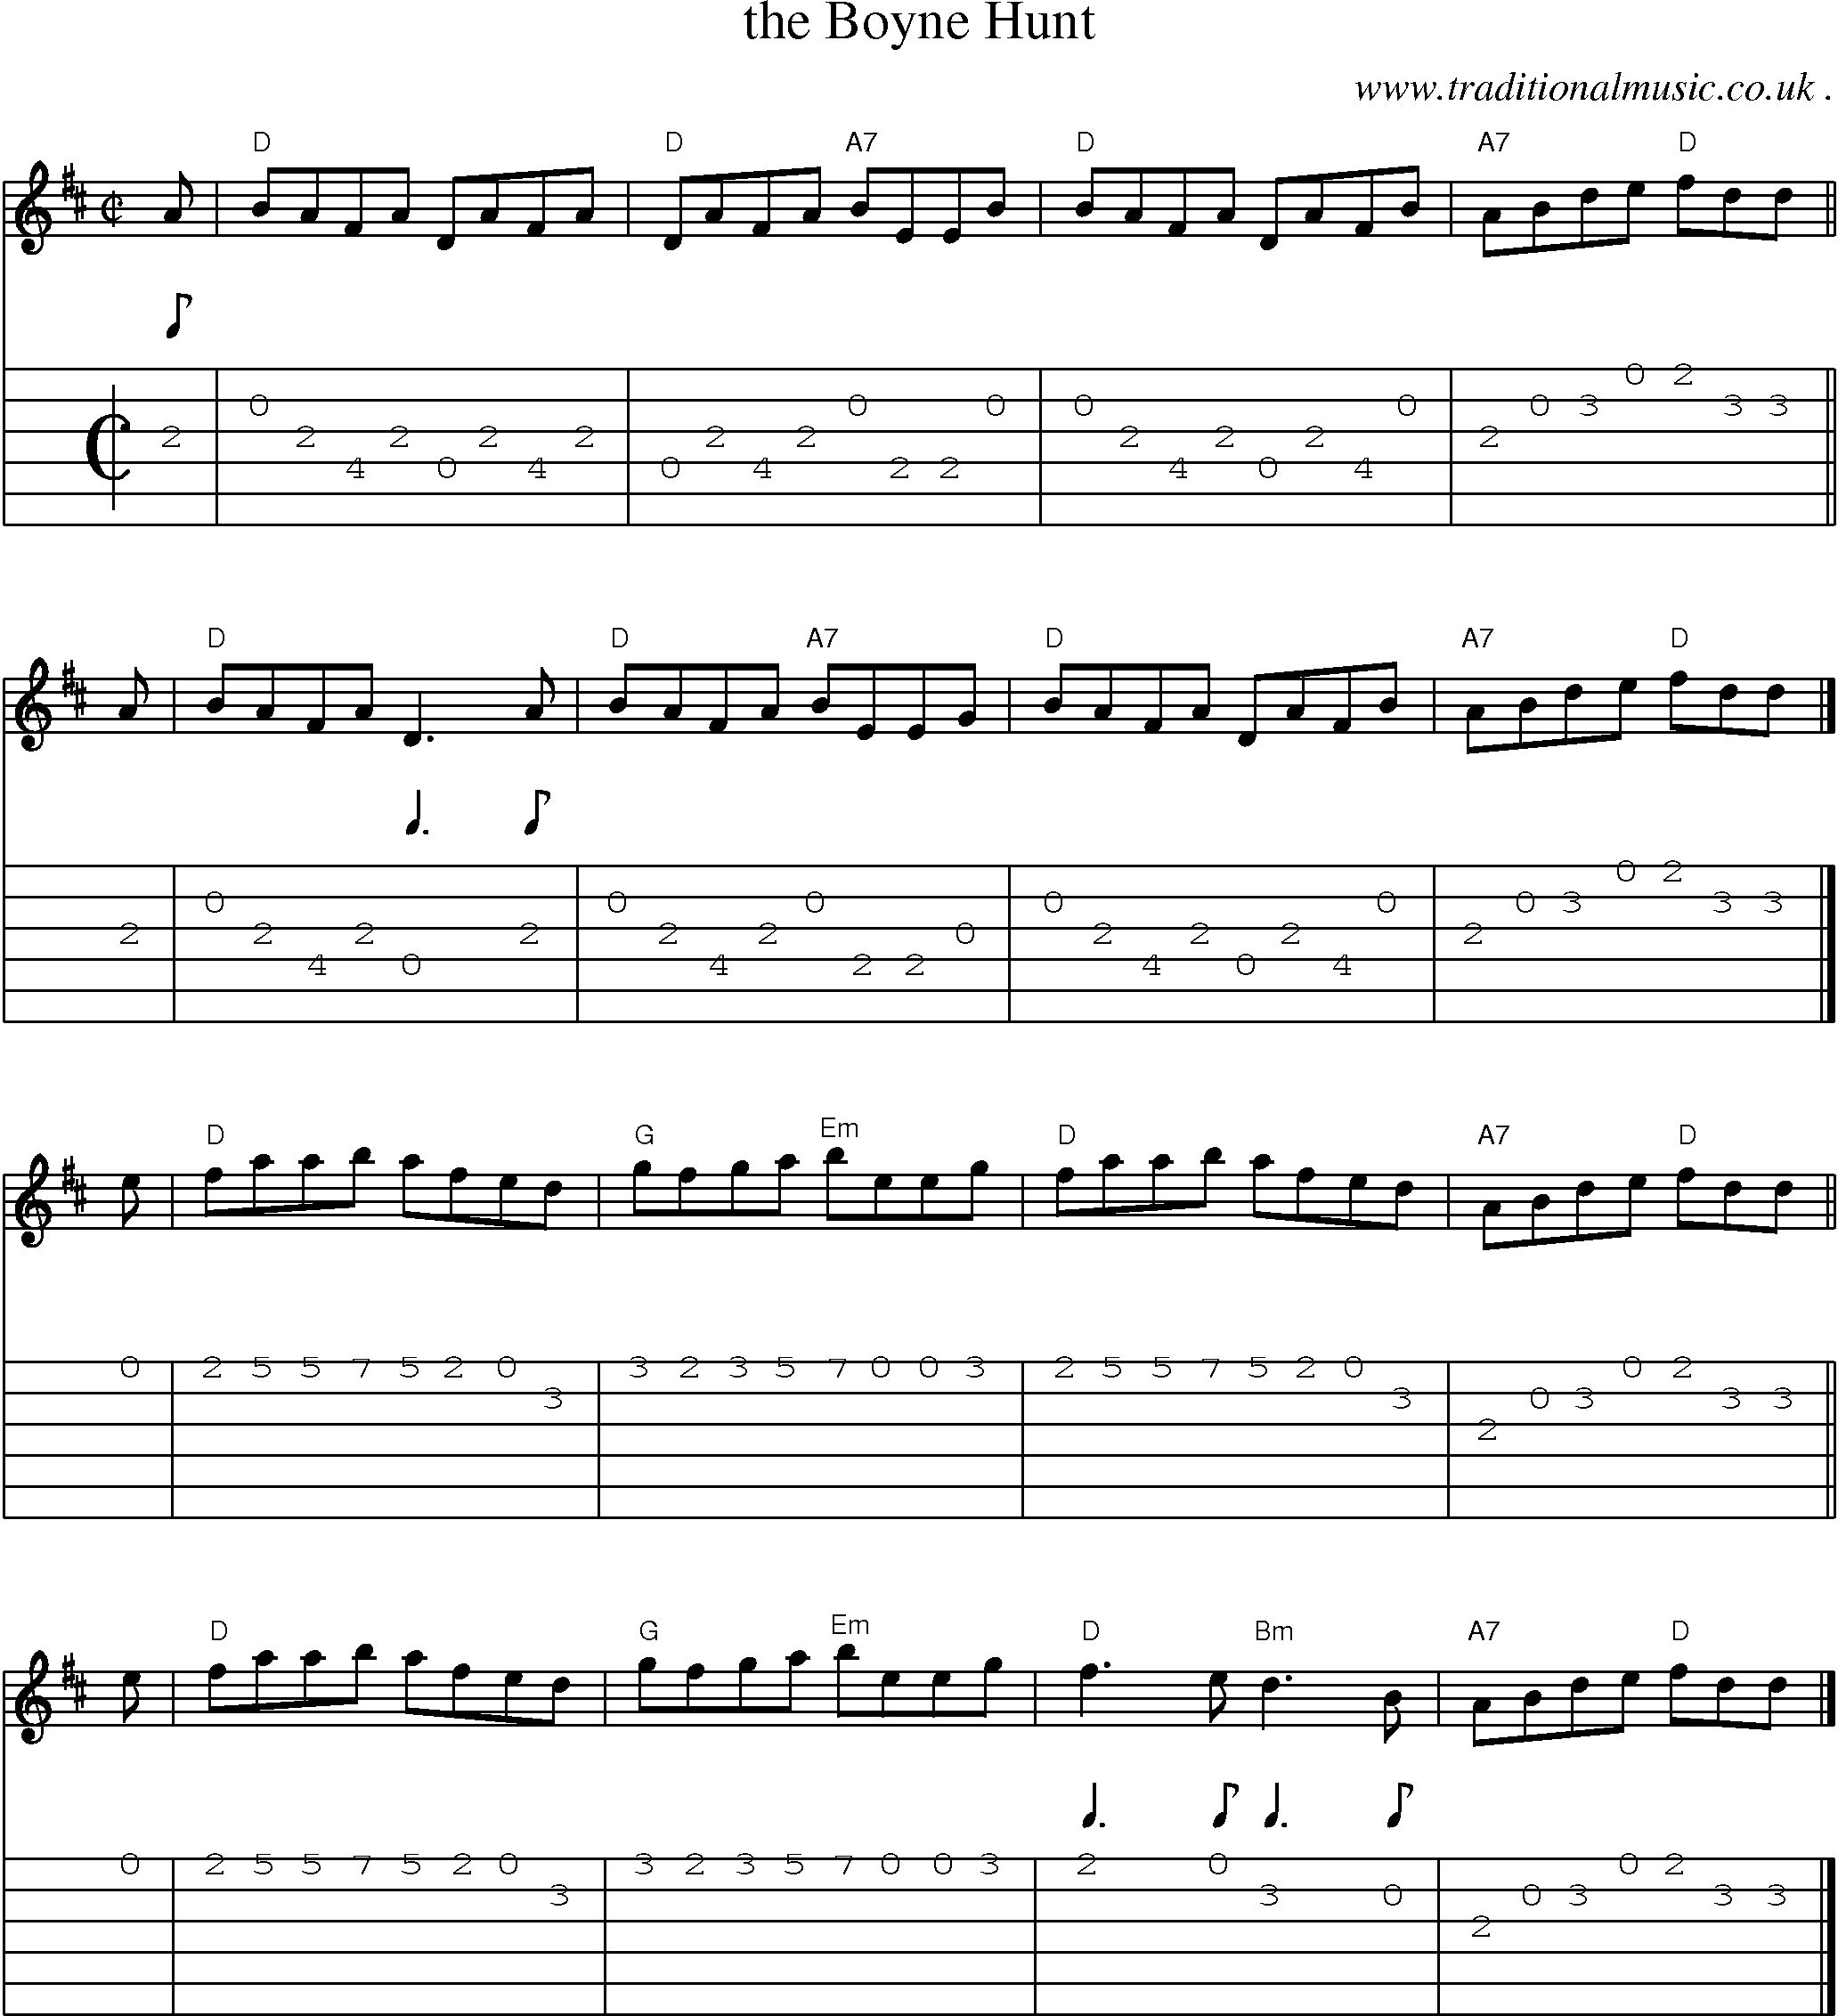 Sheet-music  score, Chords and Guitar Tabs for The Boyne Hunt